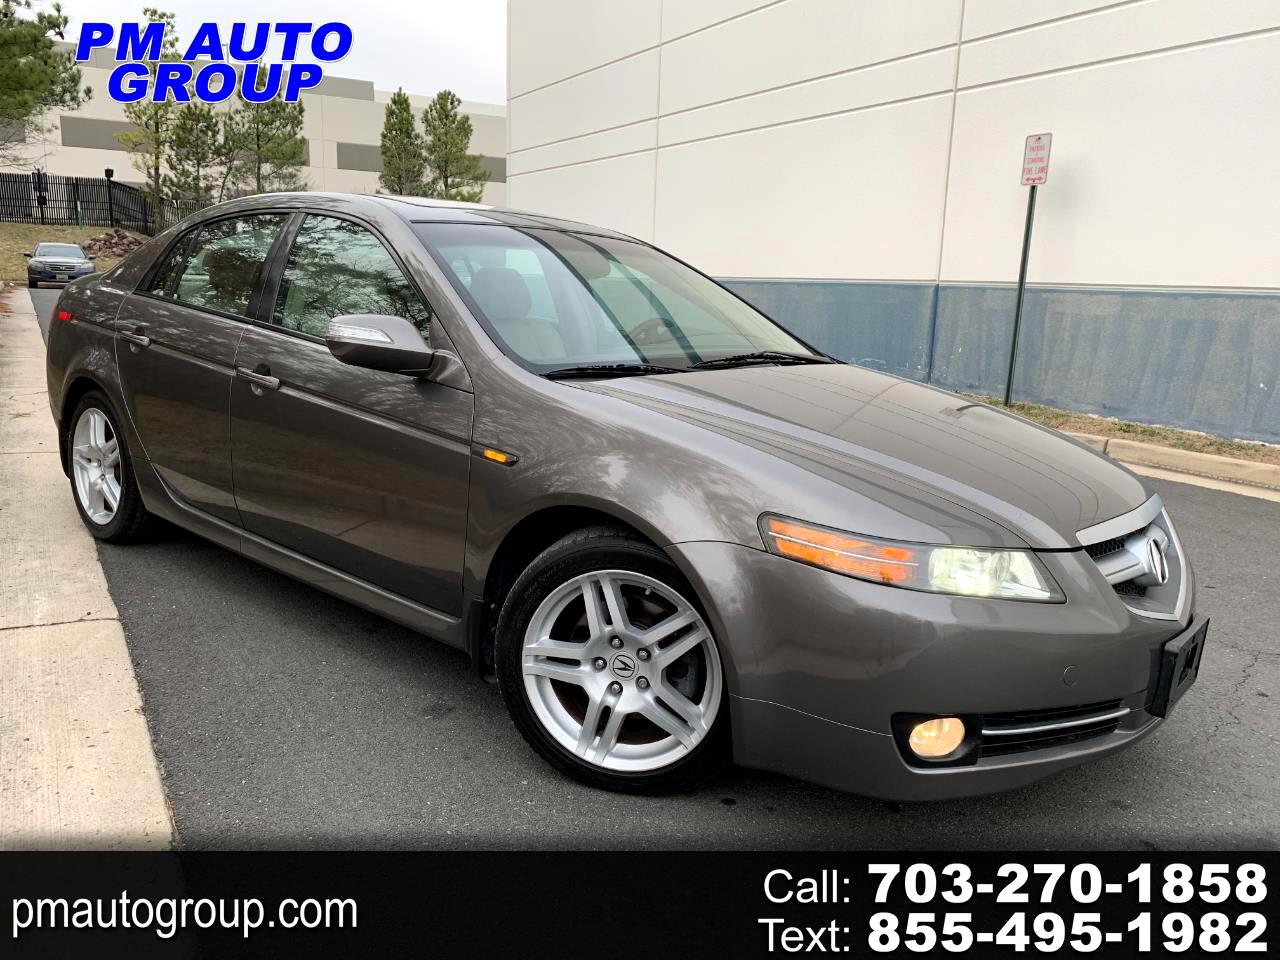 Acura TL 3.2TL with Navigation System 2008